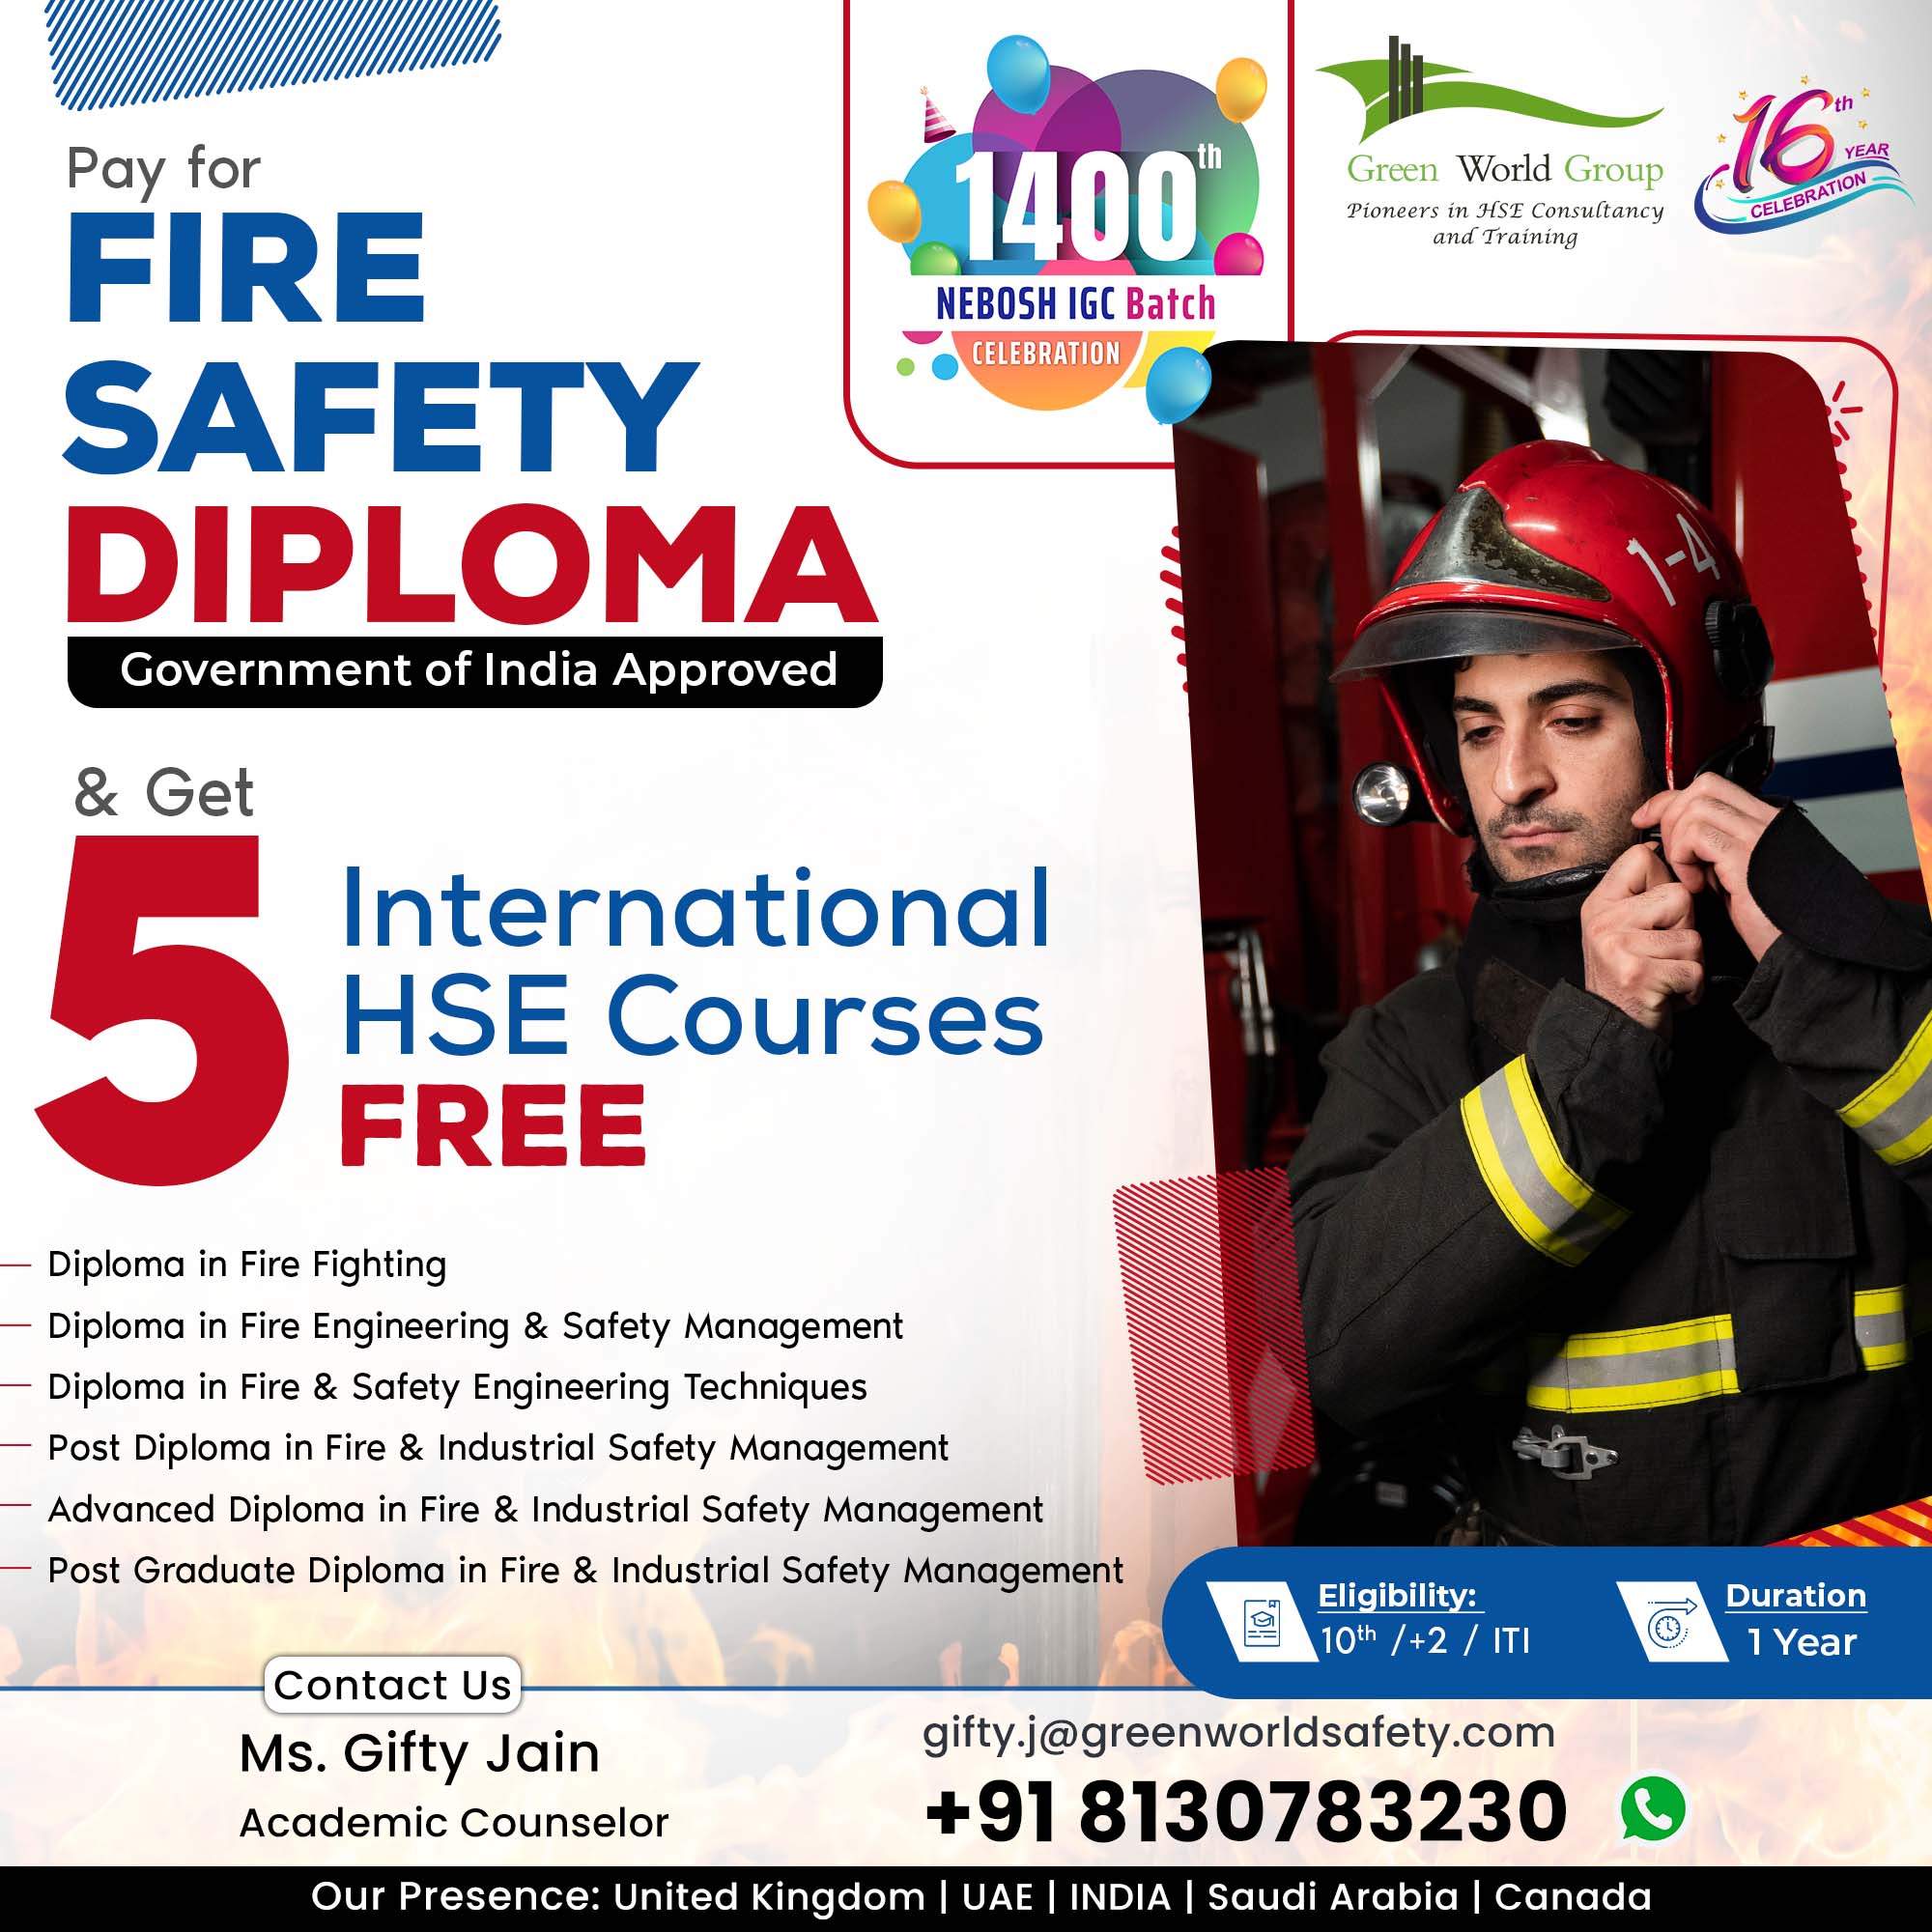 Green World’s Blockbuster Offer on a Fire Safety